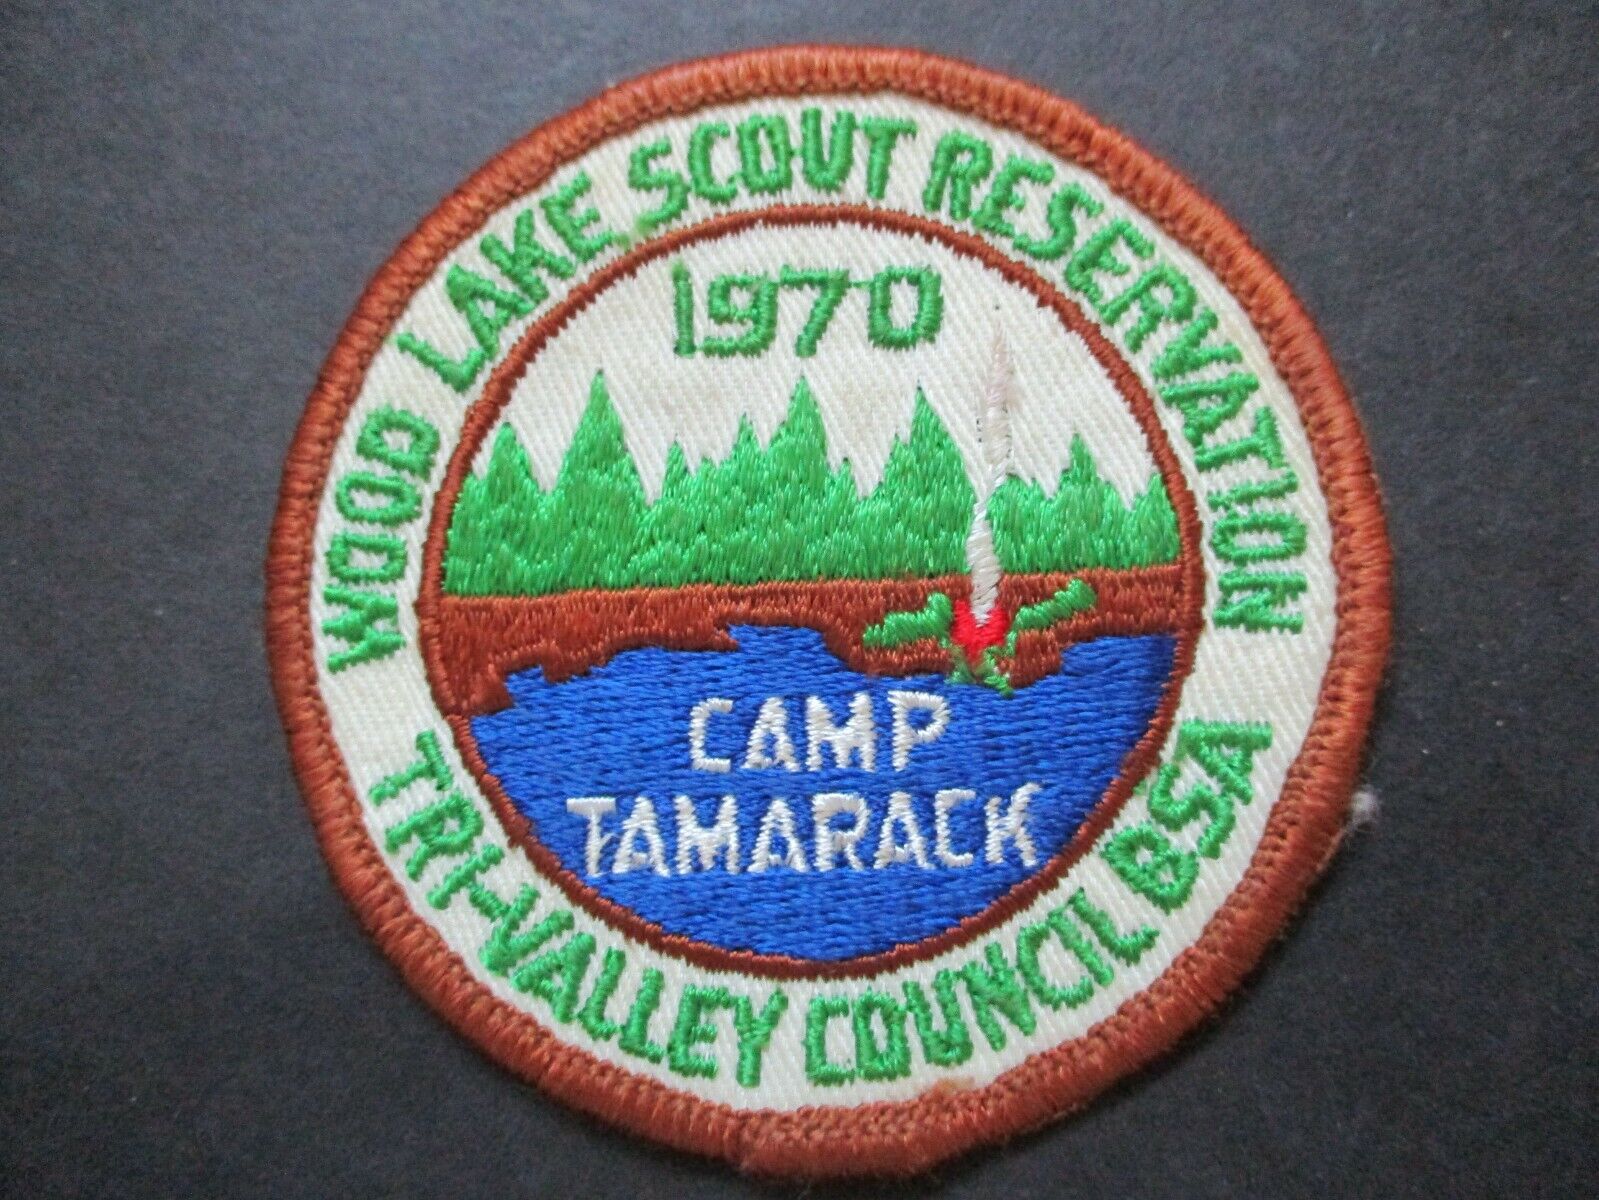 1970 Wood Lake Scout Reservation Camp Tamarack BSA boy scout patch